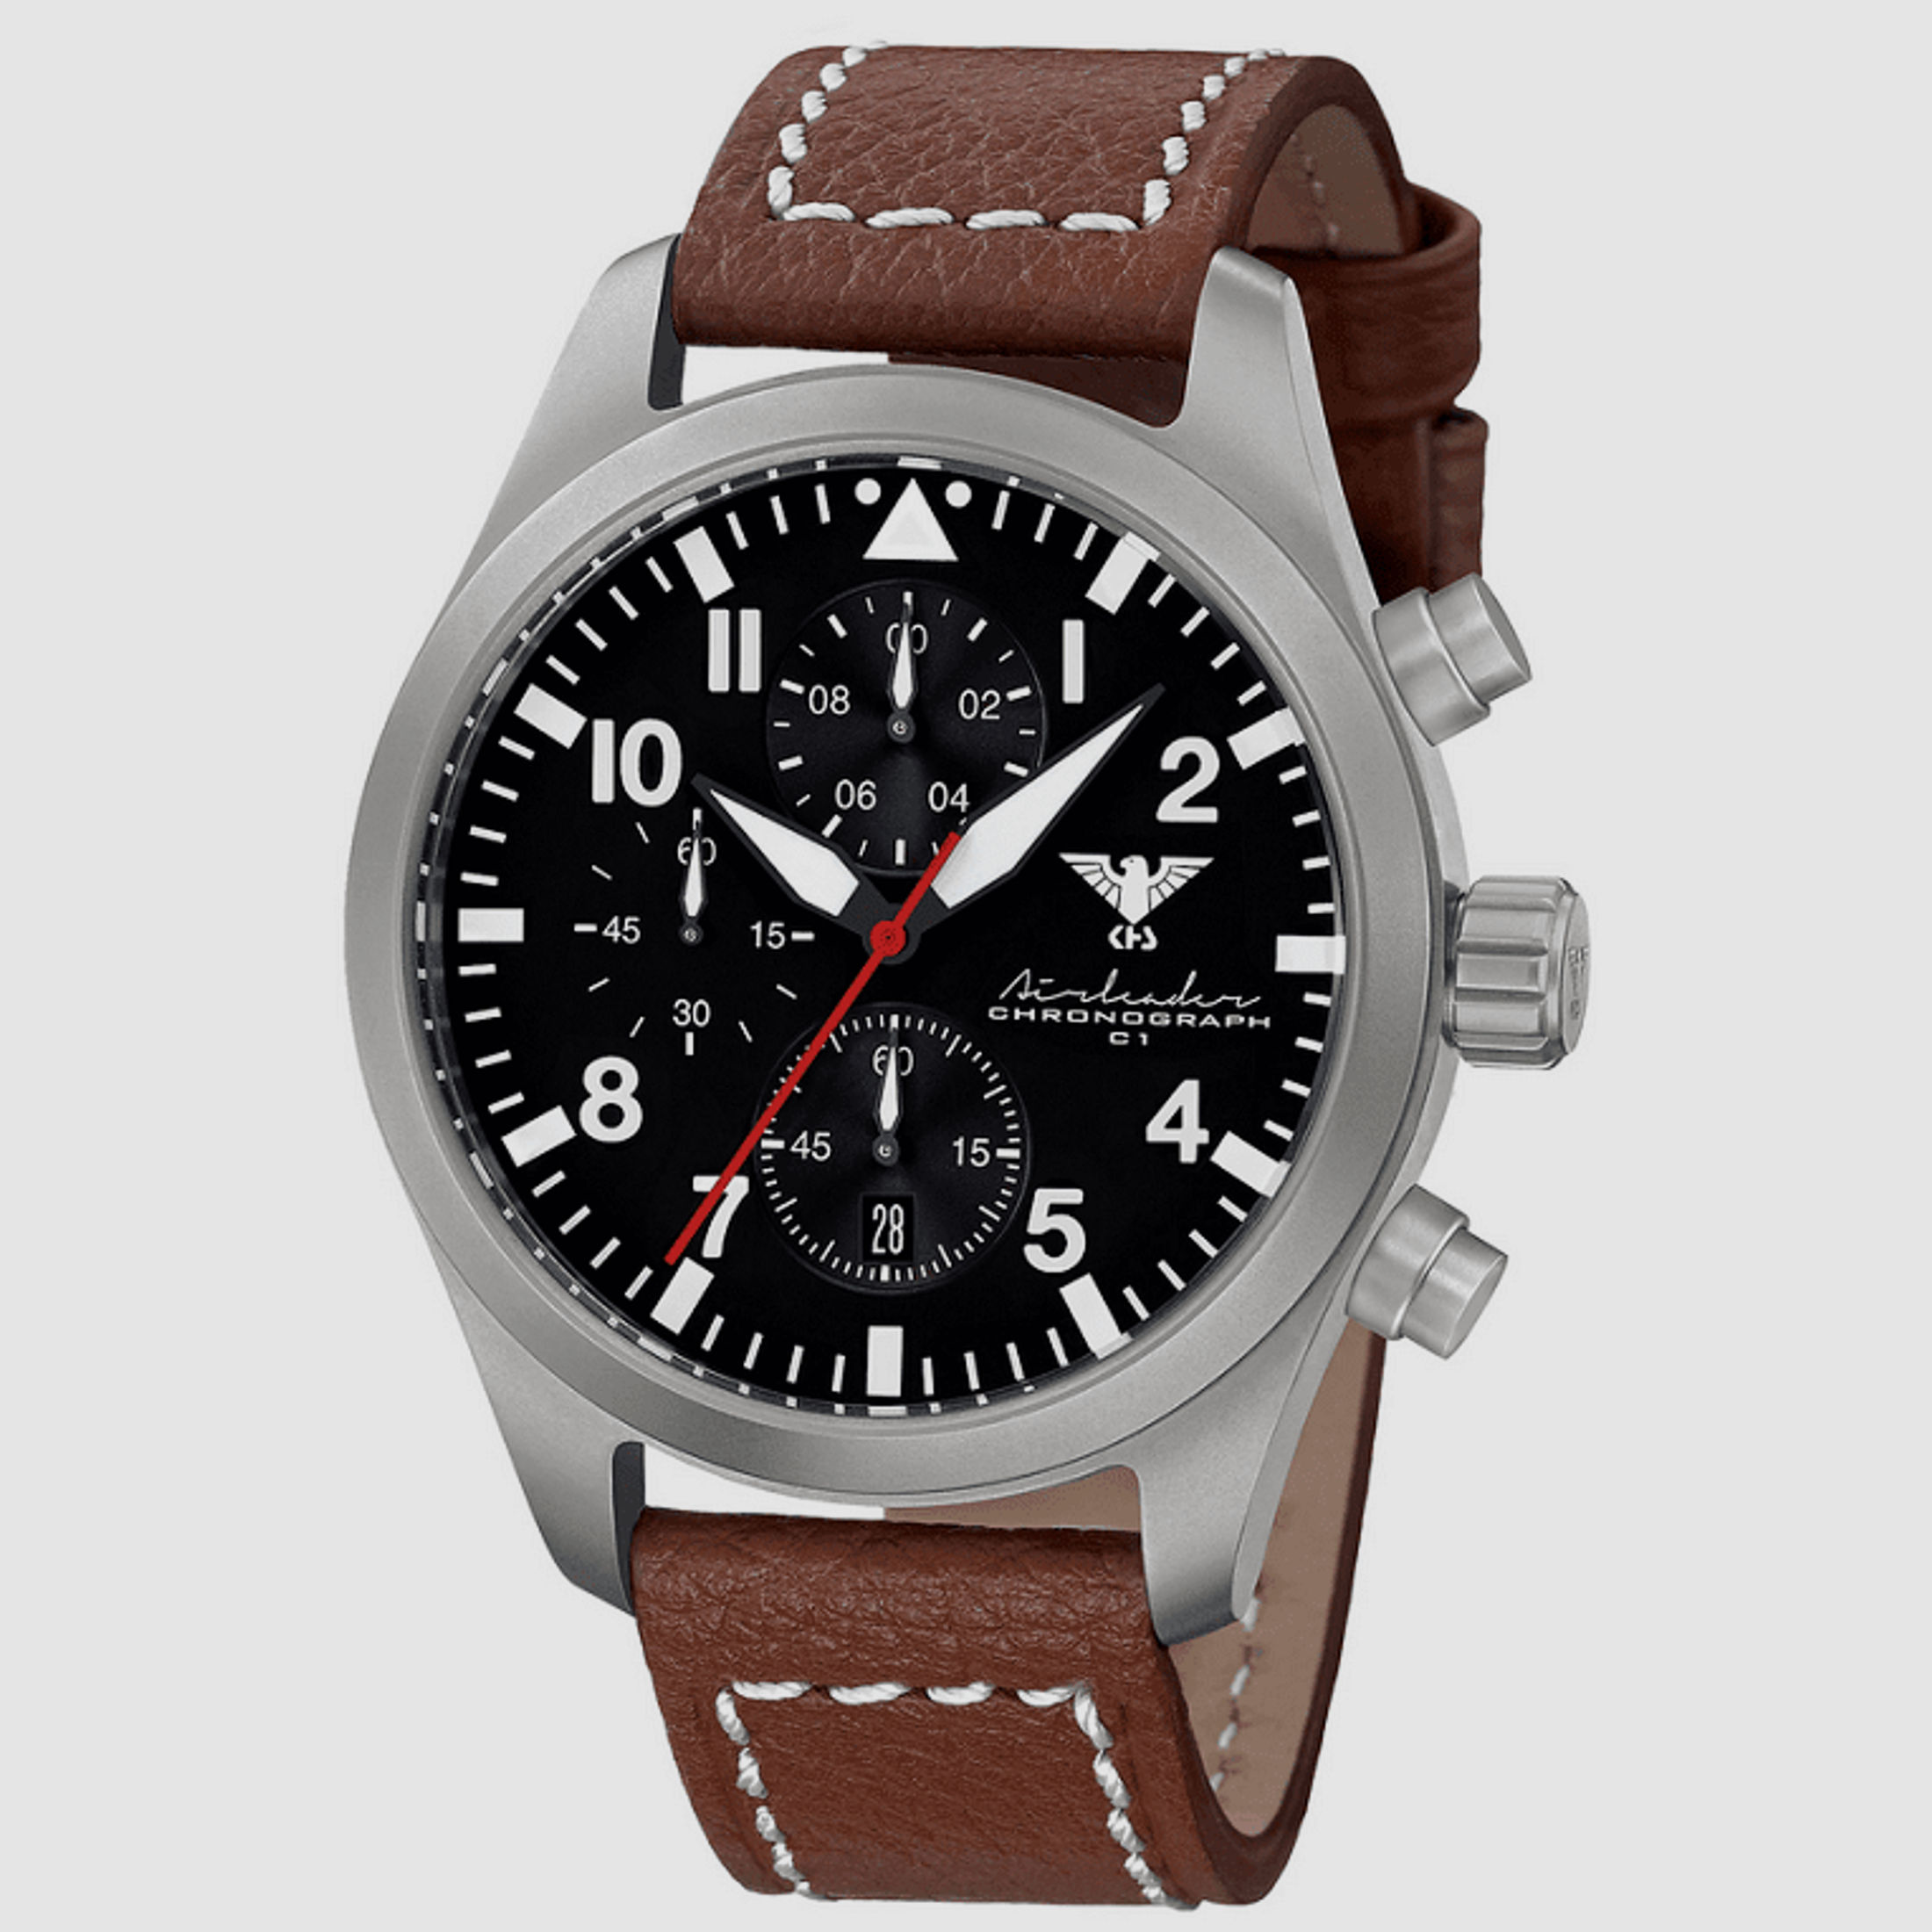 KHS Airleader Steel Chronograph Tactical Watch